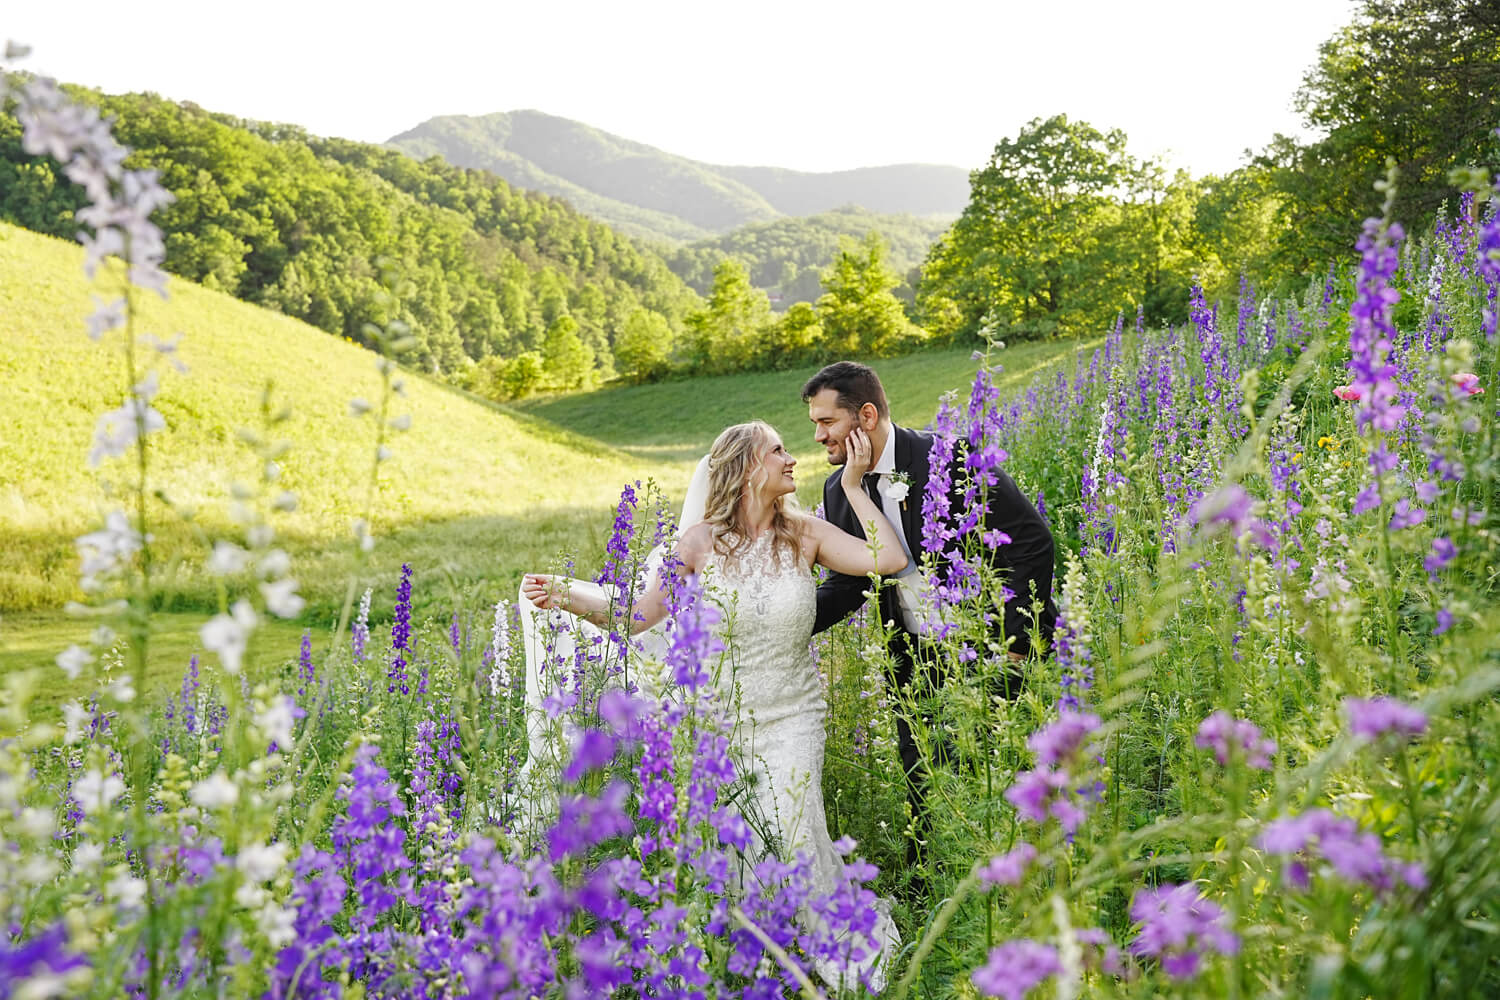 wedding couple in a field of purple larkspur with rolling hills and a mountain ridge behind them